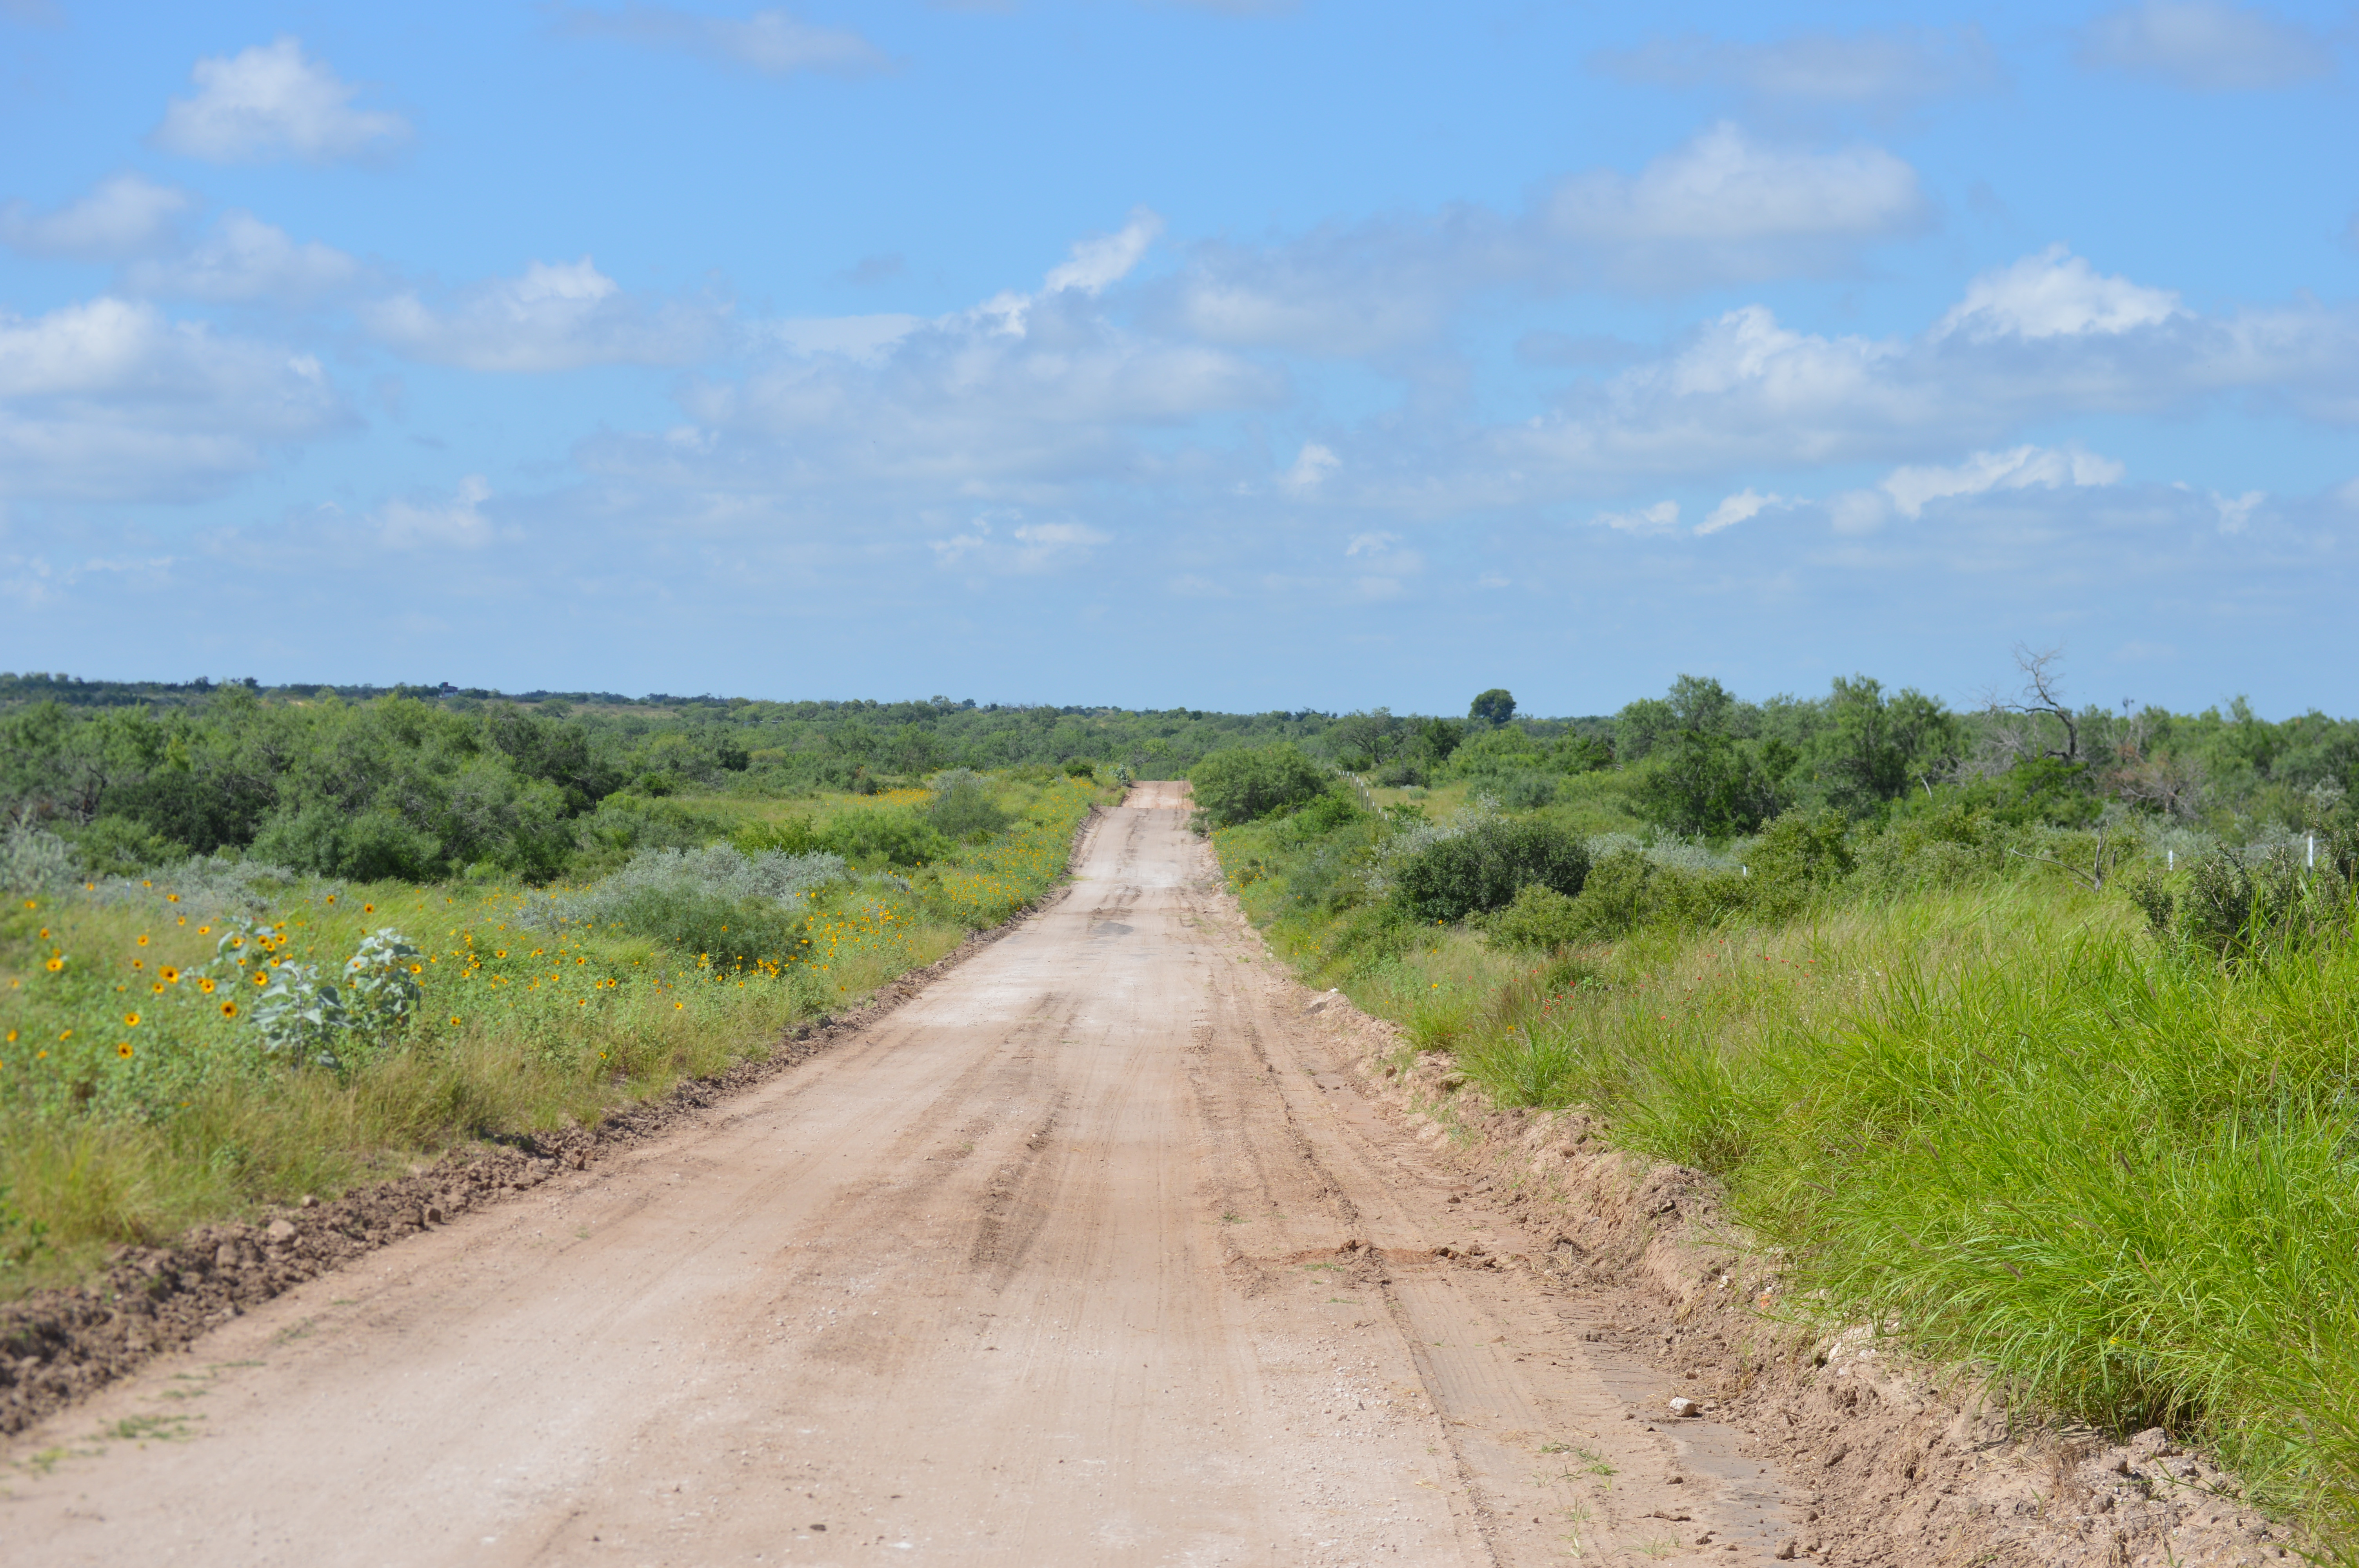 A road going down through the Texas Brush with blue skies and greenery